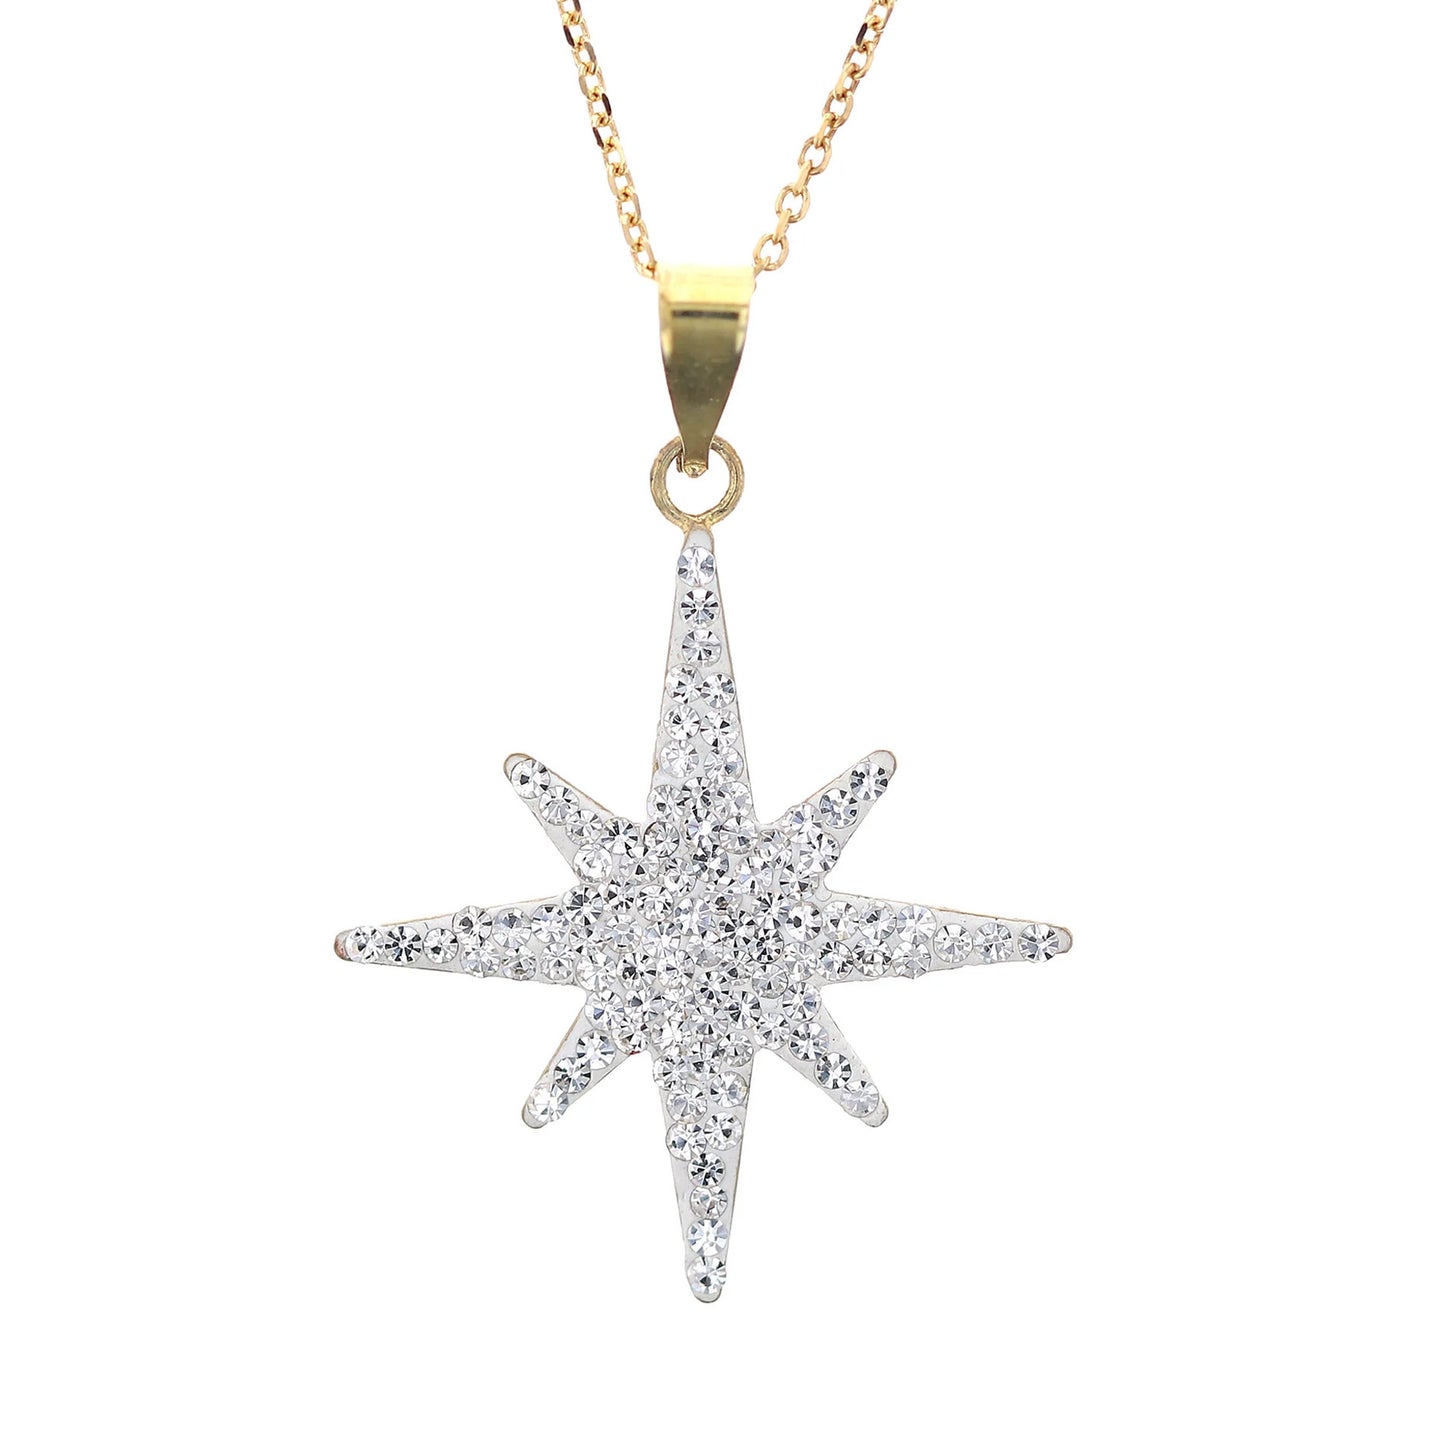 18K Gold Plated Sterling Silver North Star Pendant with White Crystals